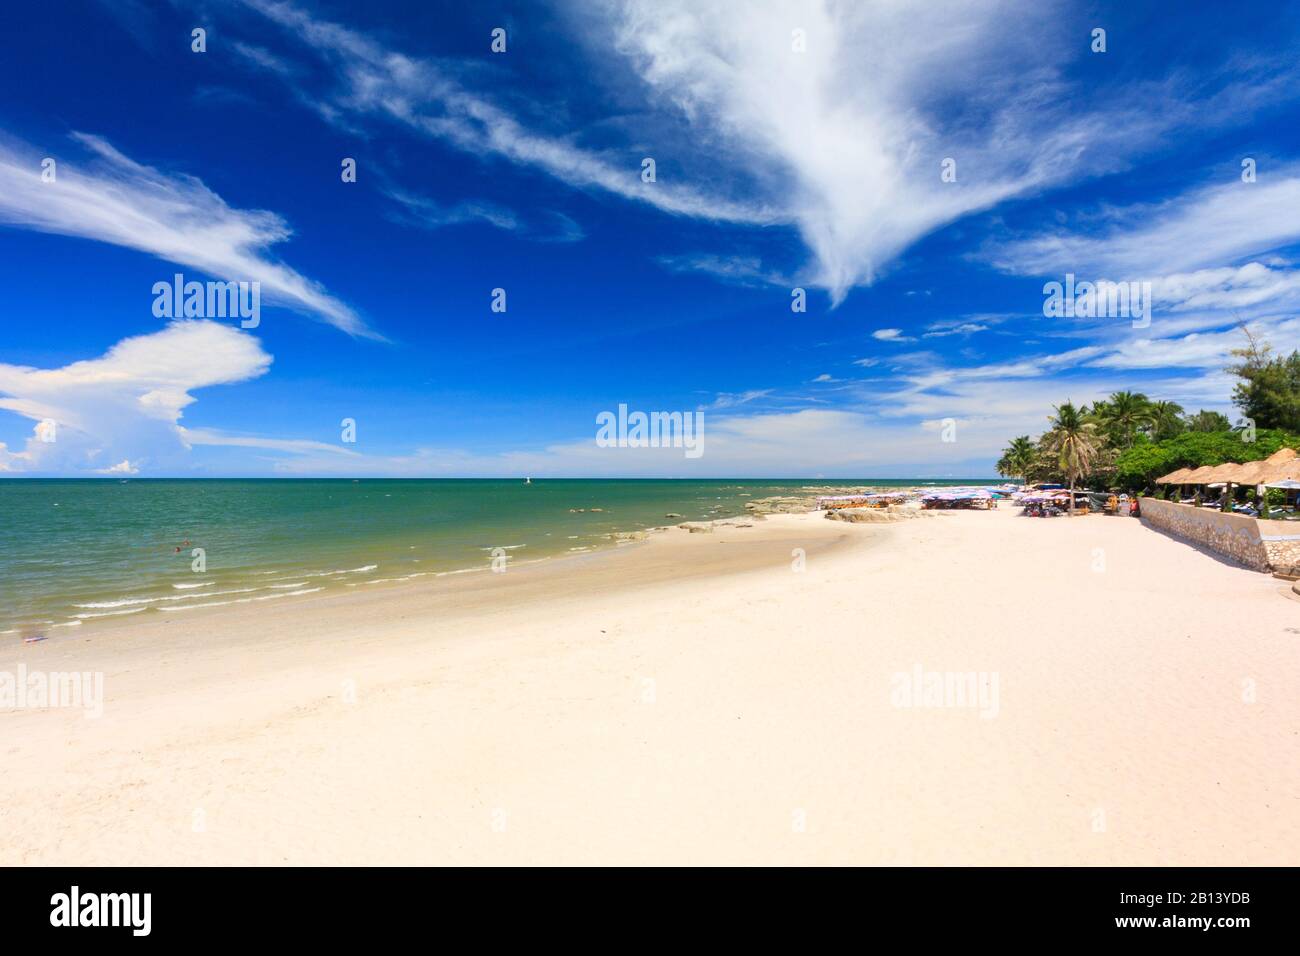 The beach in front of a large hotel at Hua Hin, Thailand Stock Photo